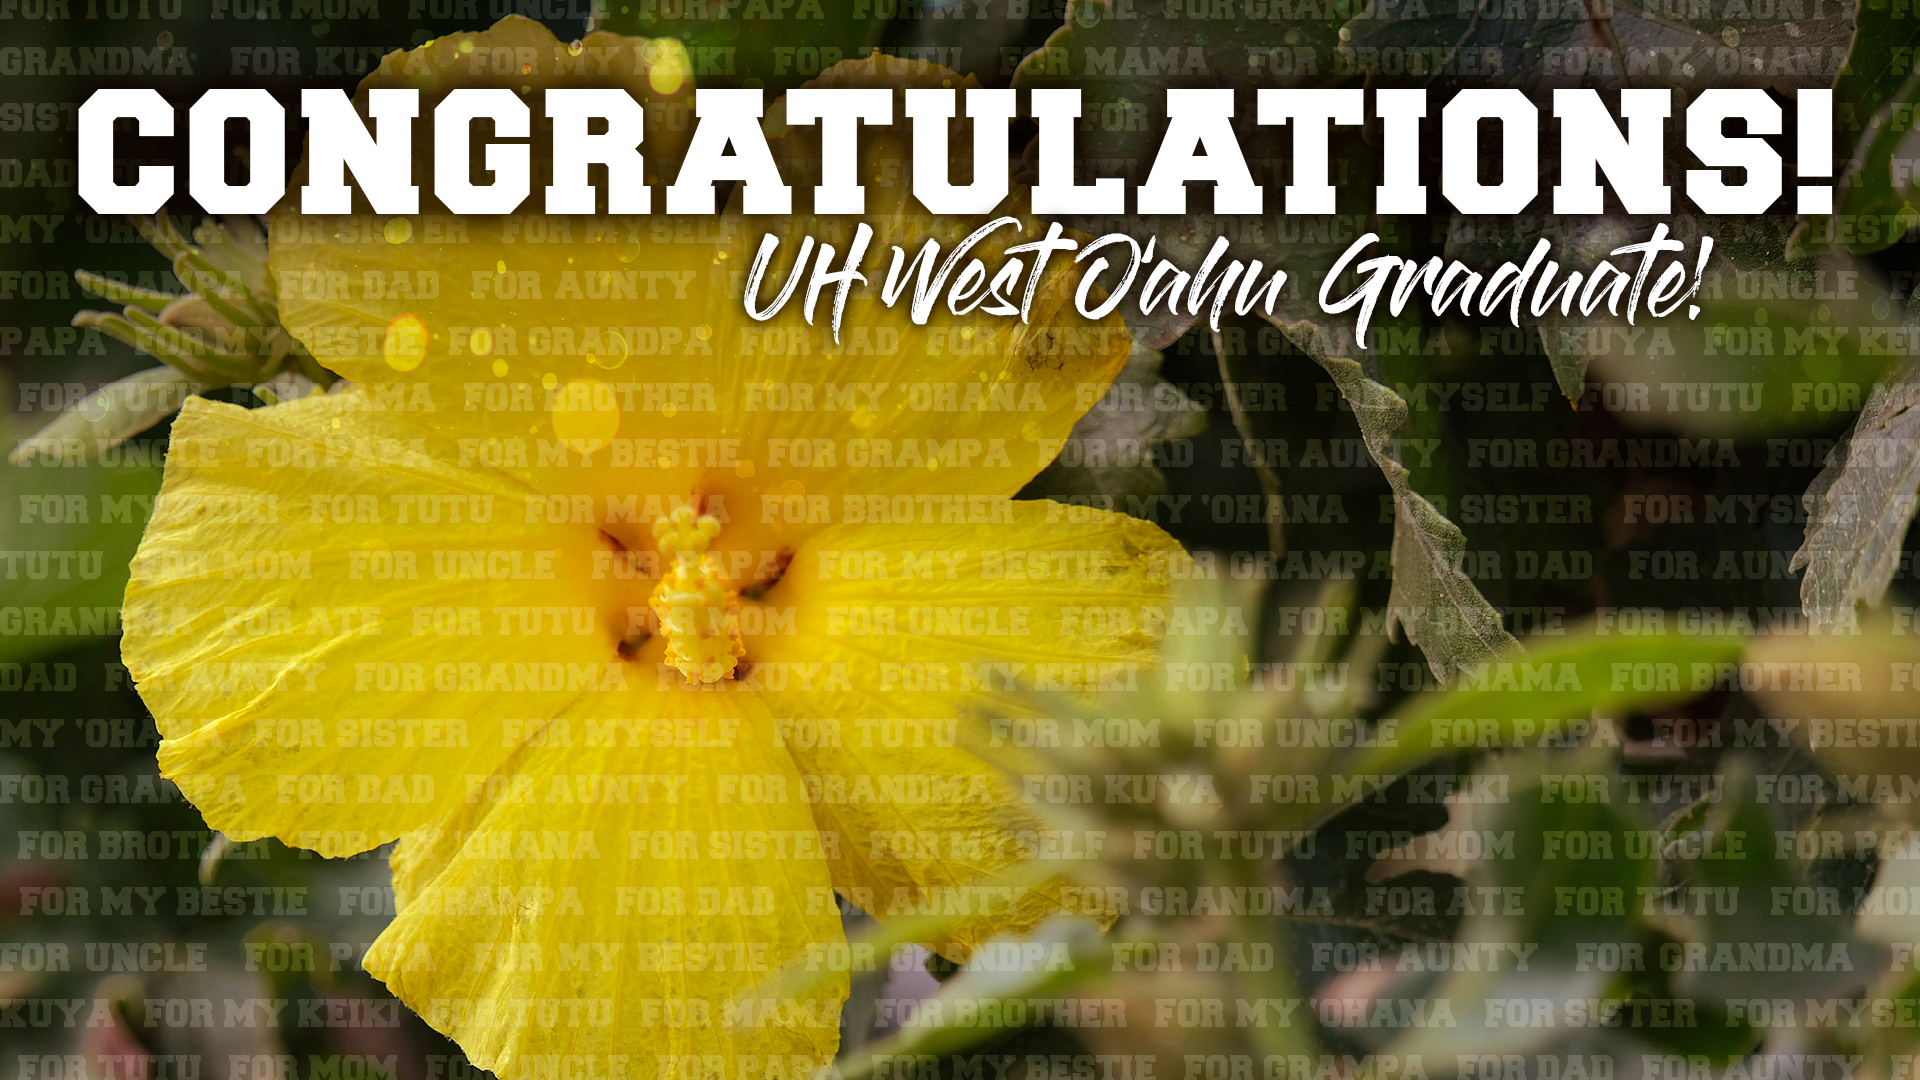 Congratulations UH West Oahu Graduate graphic for Zoom background.